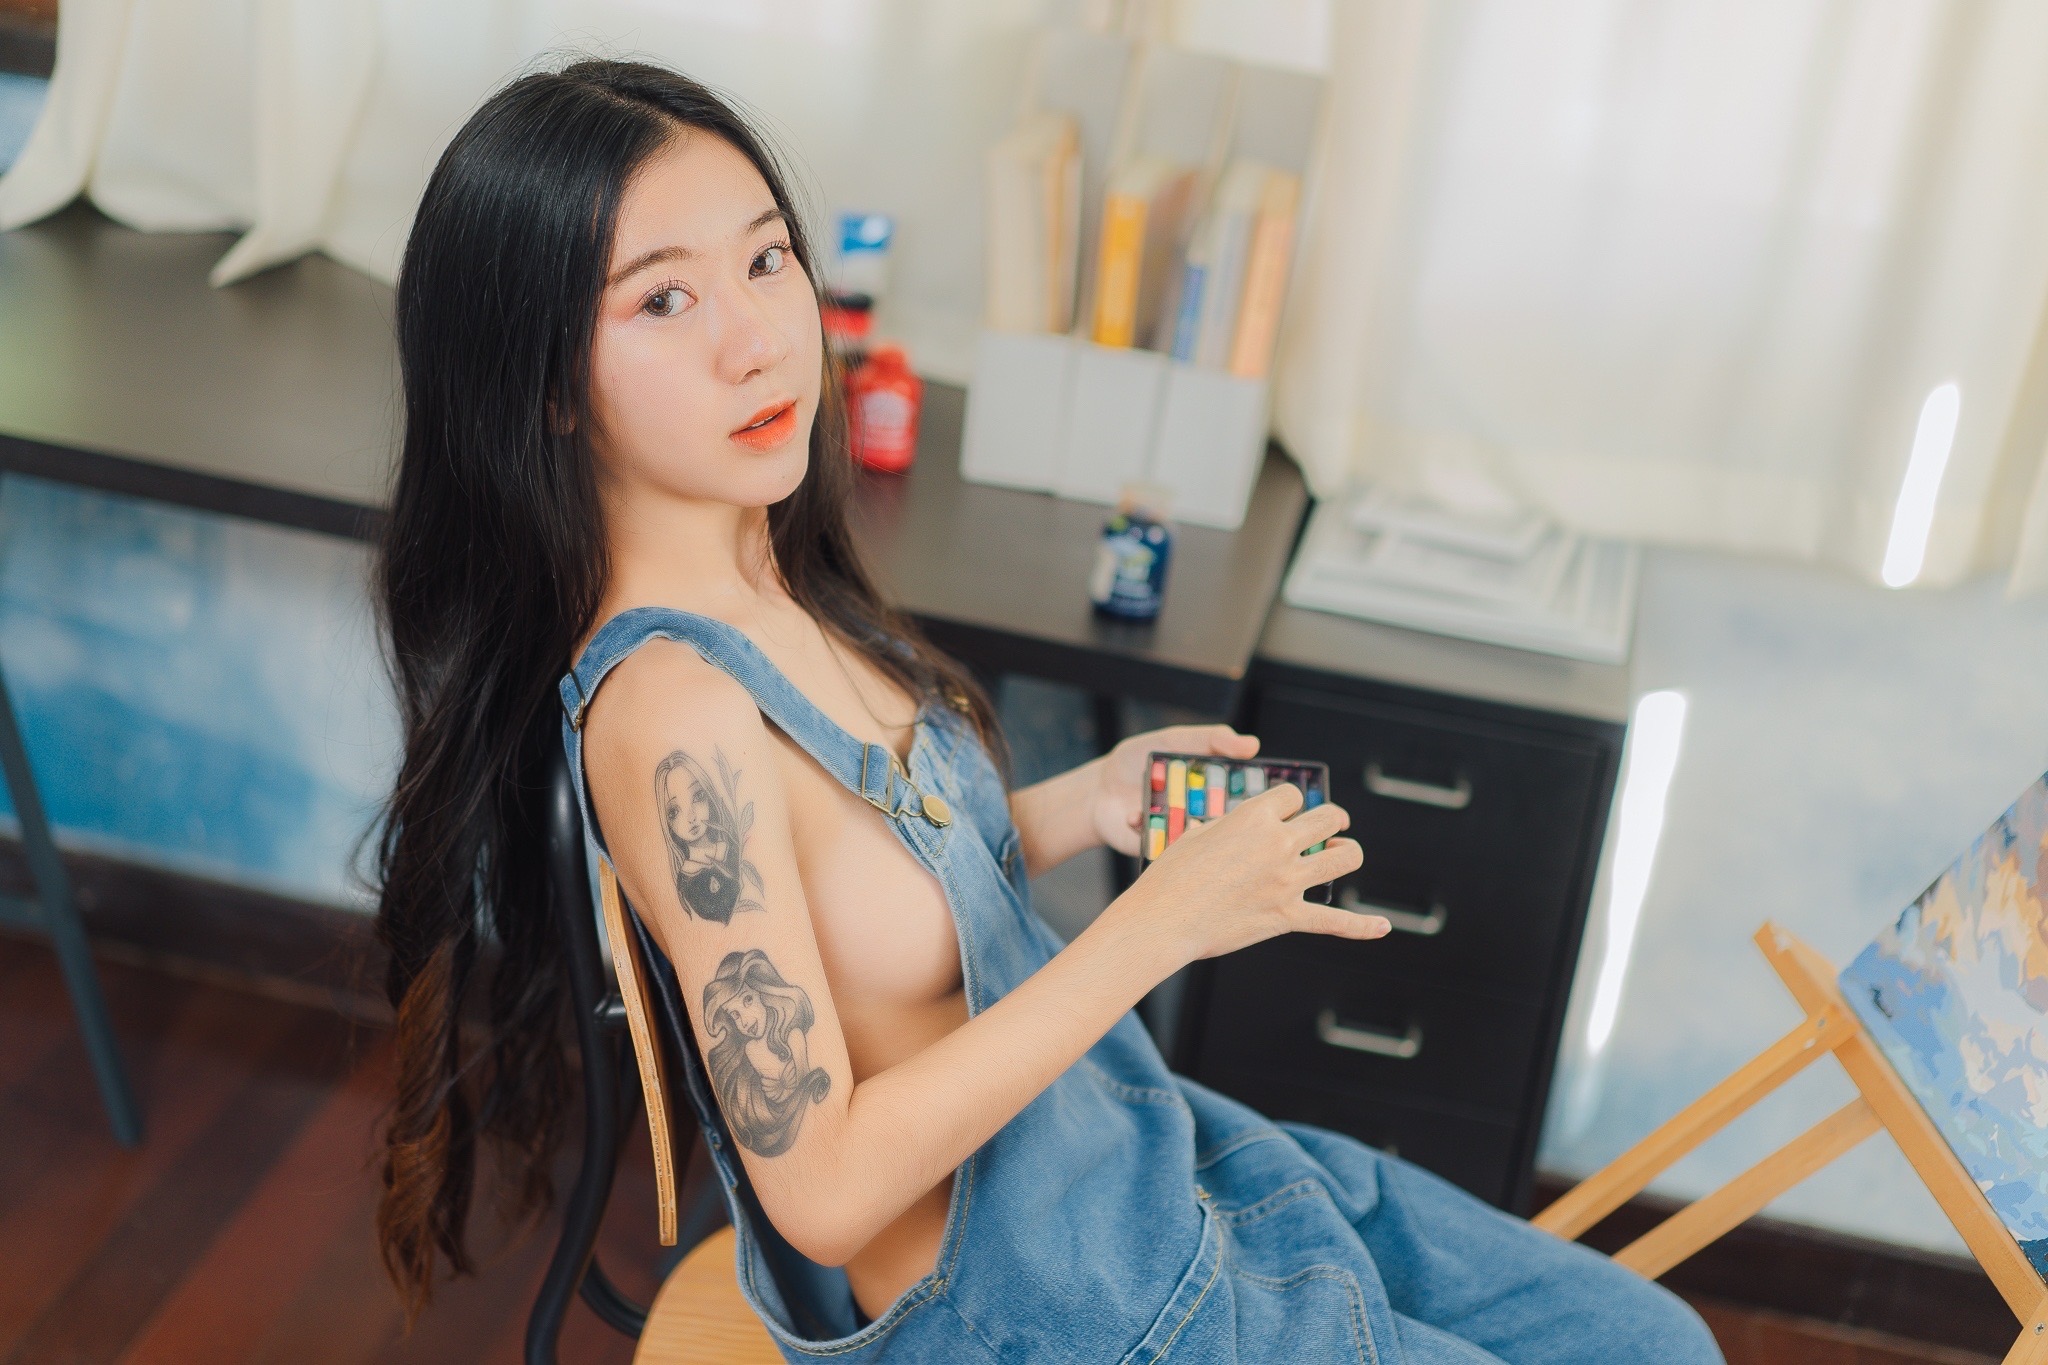 People 2048x1365 Asian women model photography tattoo jeans overalls jeans overalls